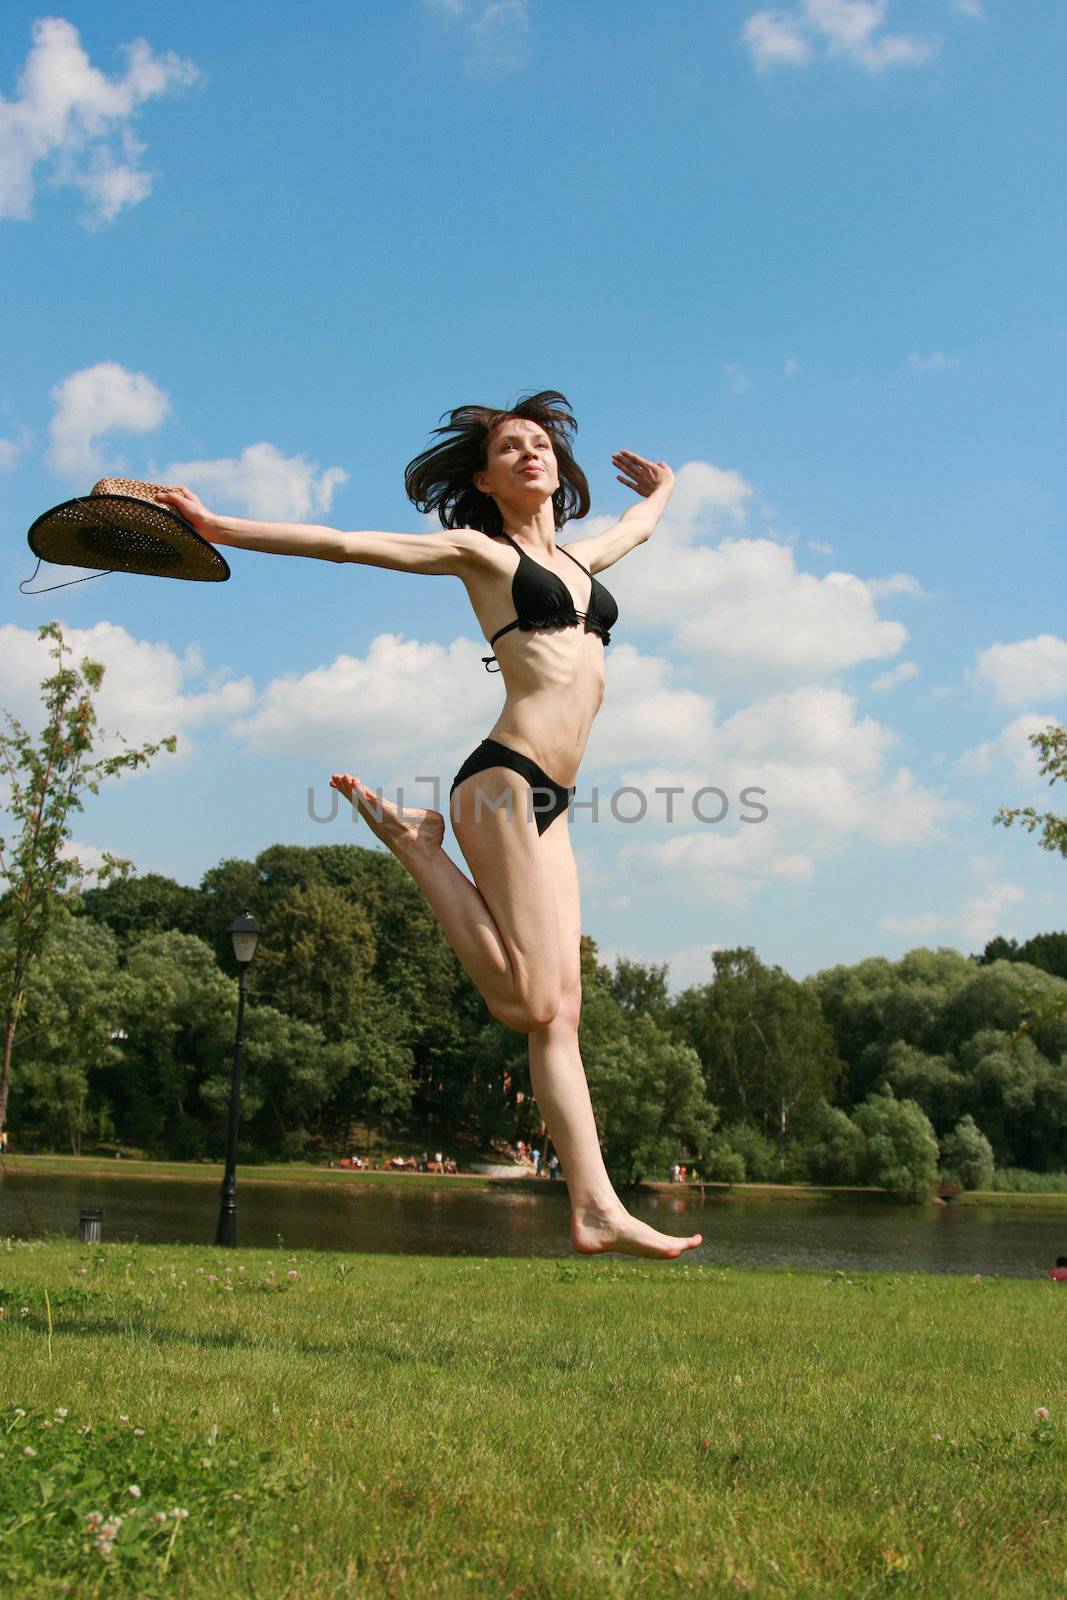 The girl jumps above the ground in a sunny day